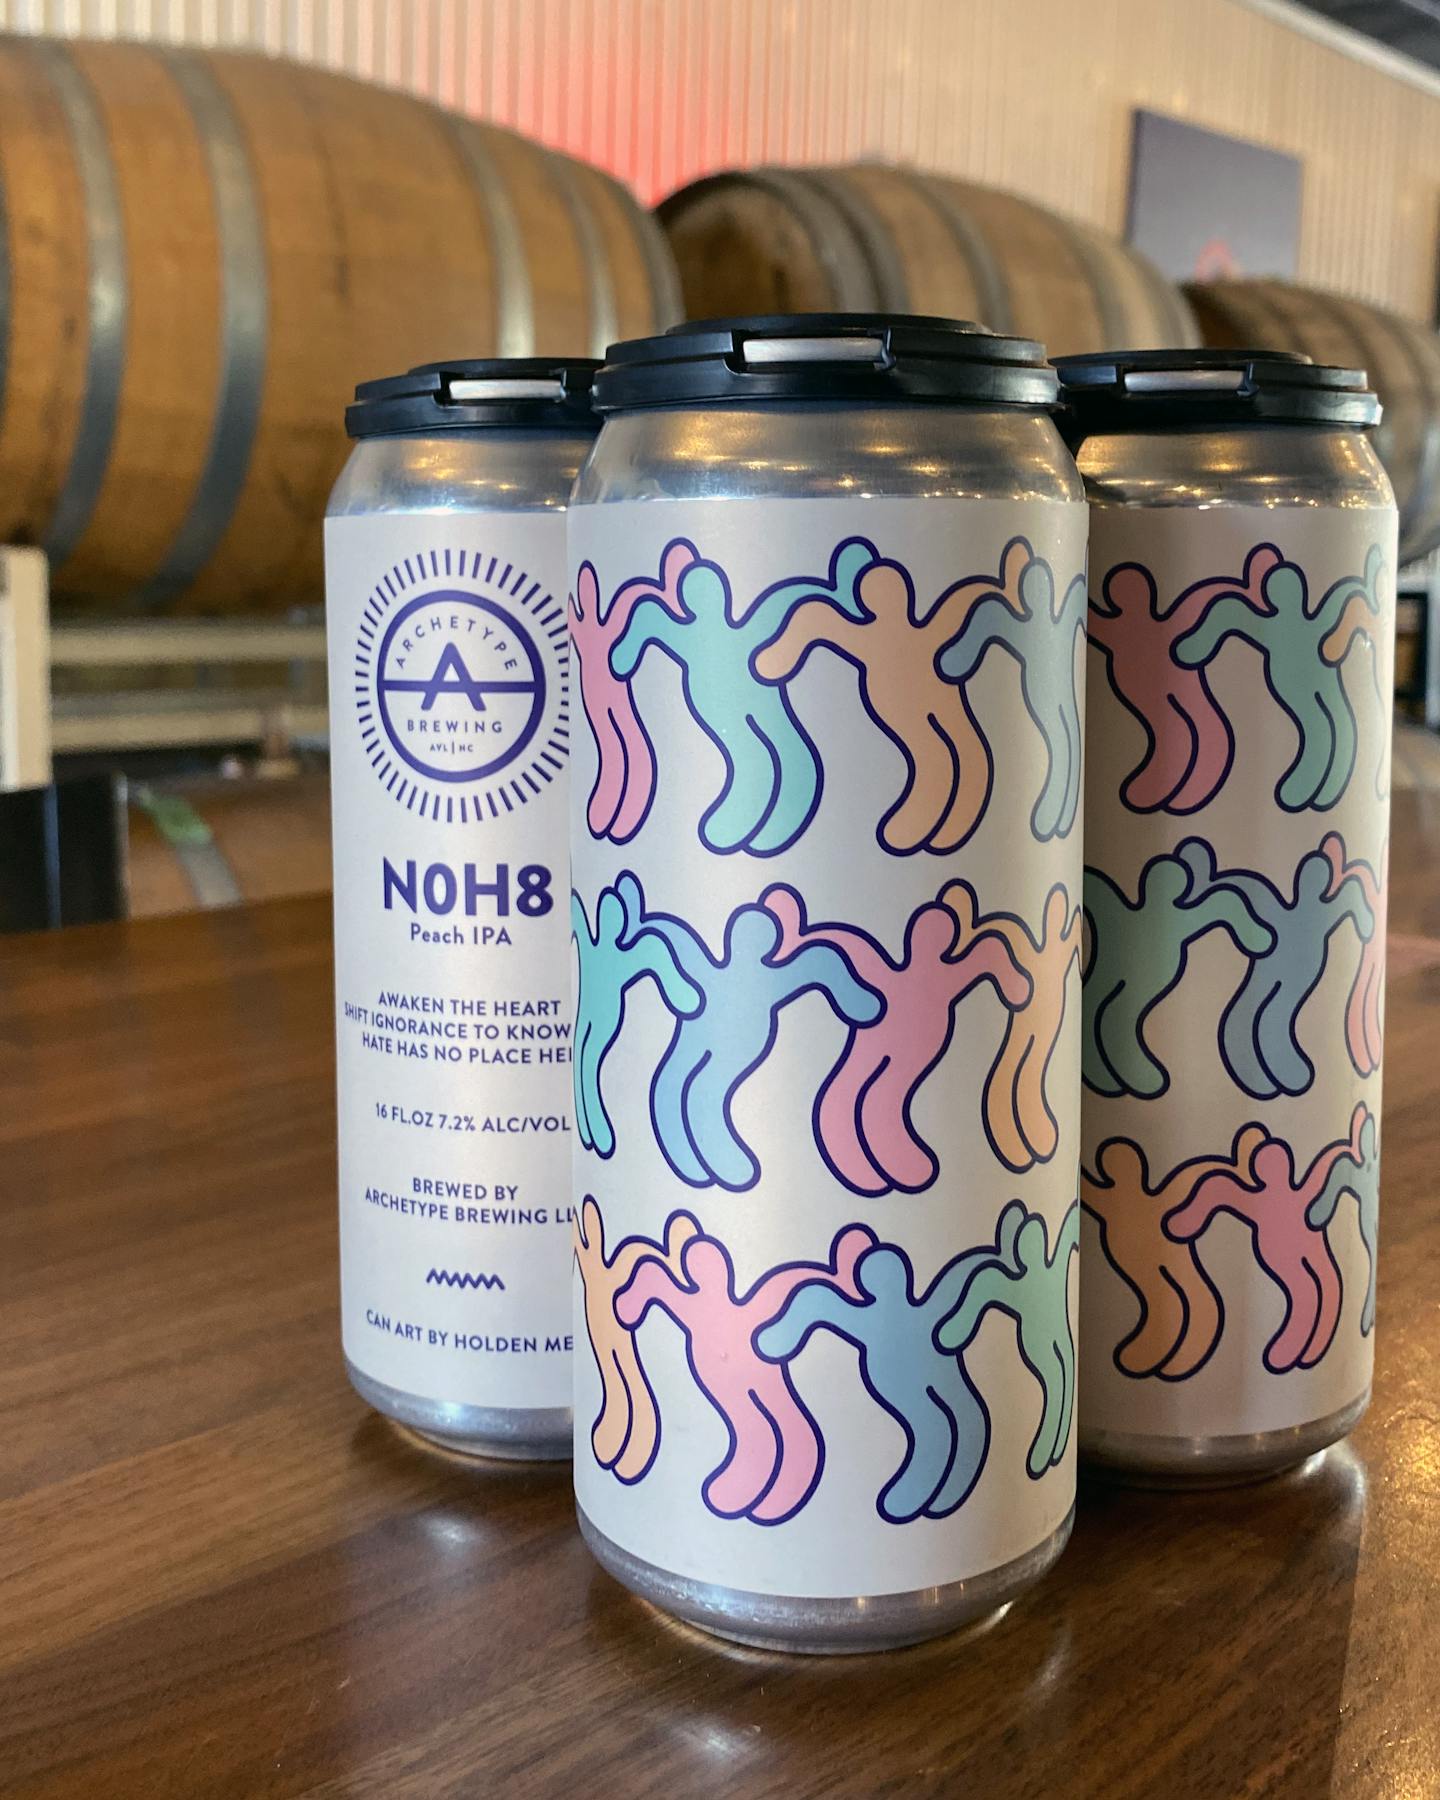 N0H8 cans archetype brewing